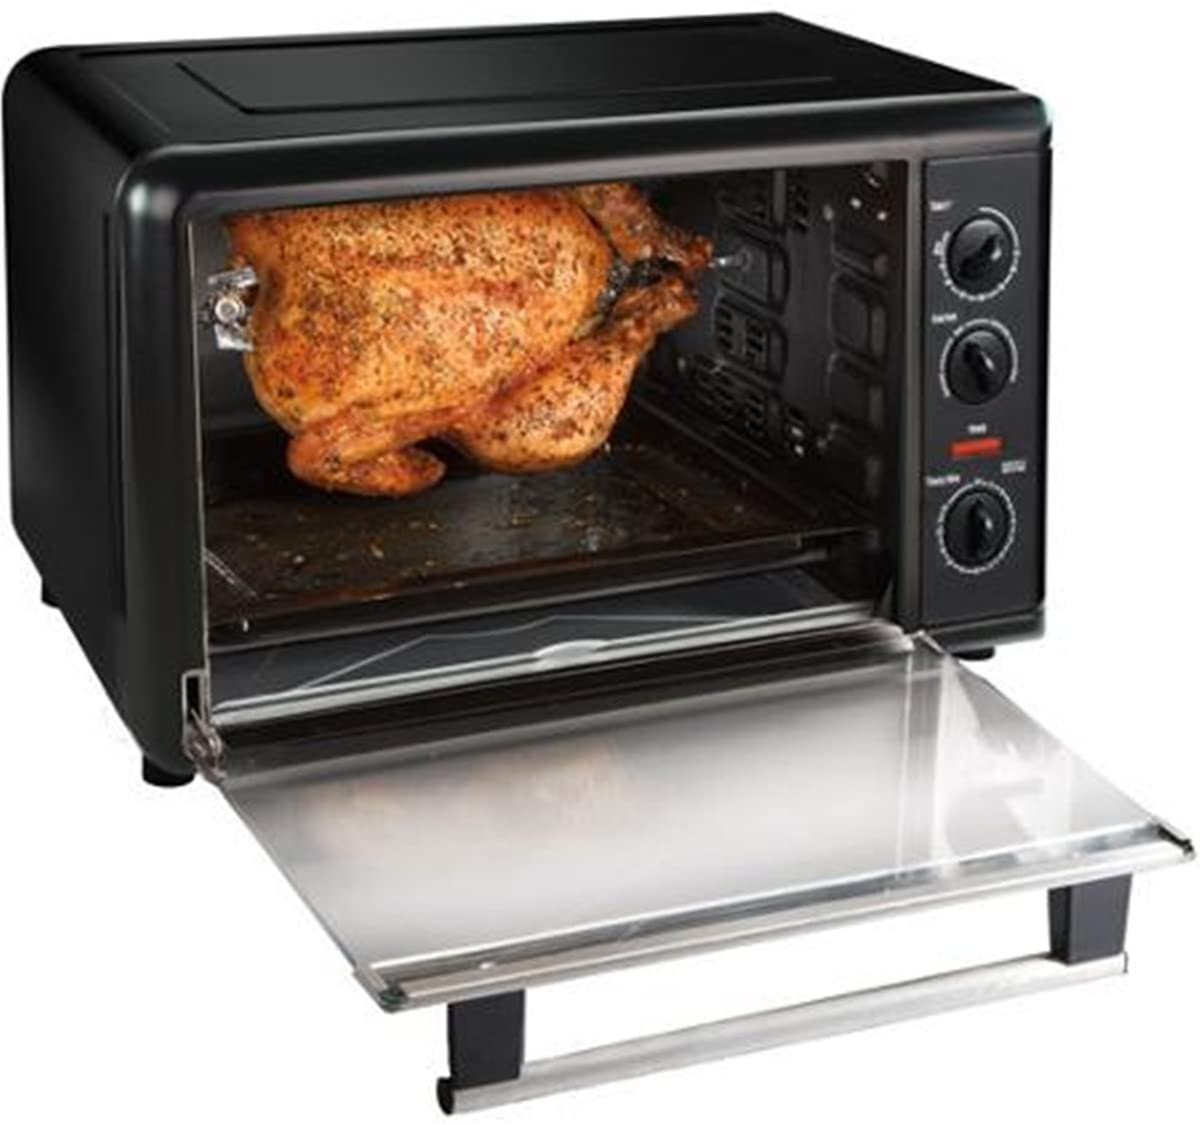 Hamilton Beach 31199 Countertop Oven with Convection and Rotisserie, 1.1  Cu.Ft., Extra-large size (PROCTOR